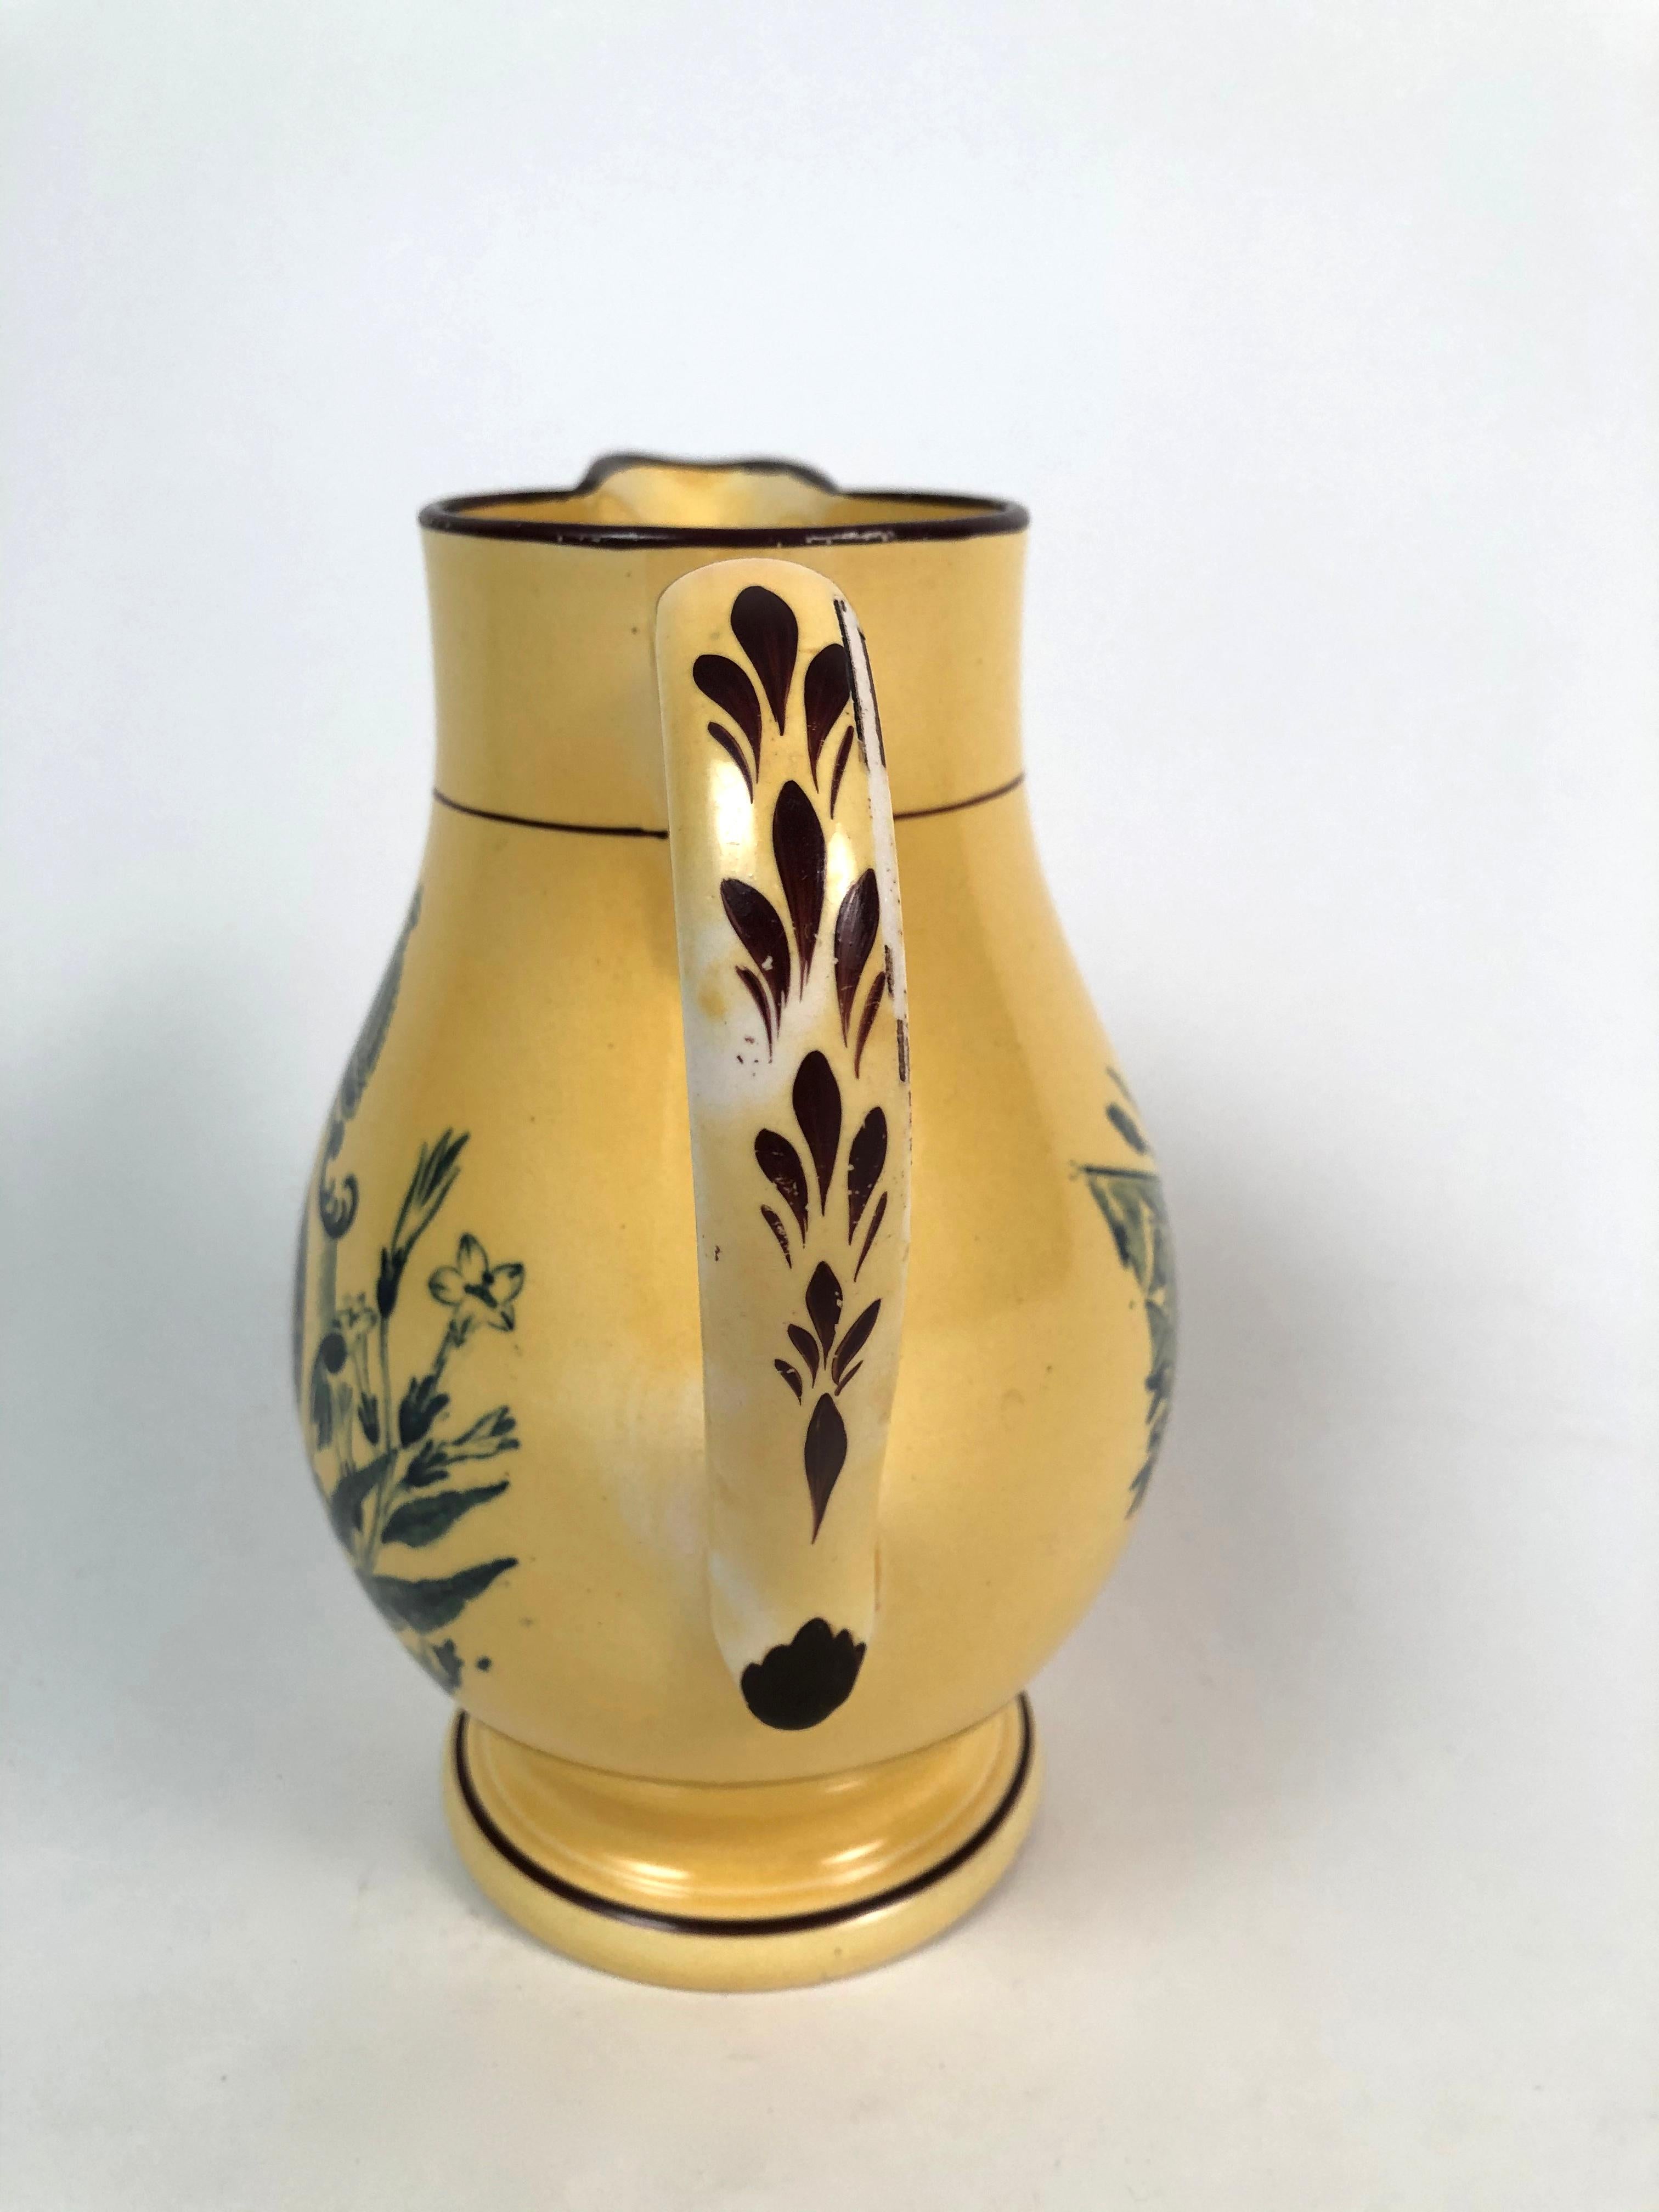 Hand-Painted Yellow Glazed Staffordshire Pottery Brazil Independence Pitcher, circa 1825